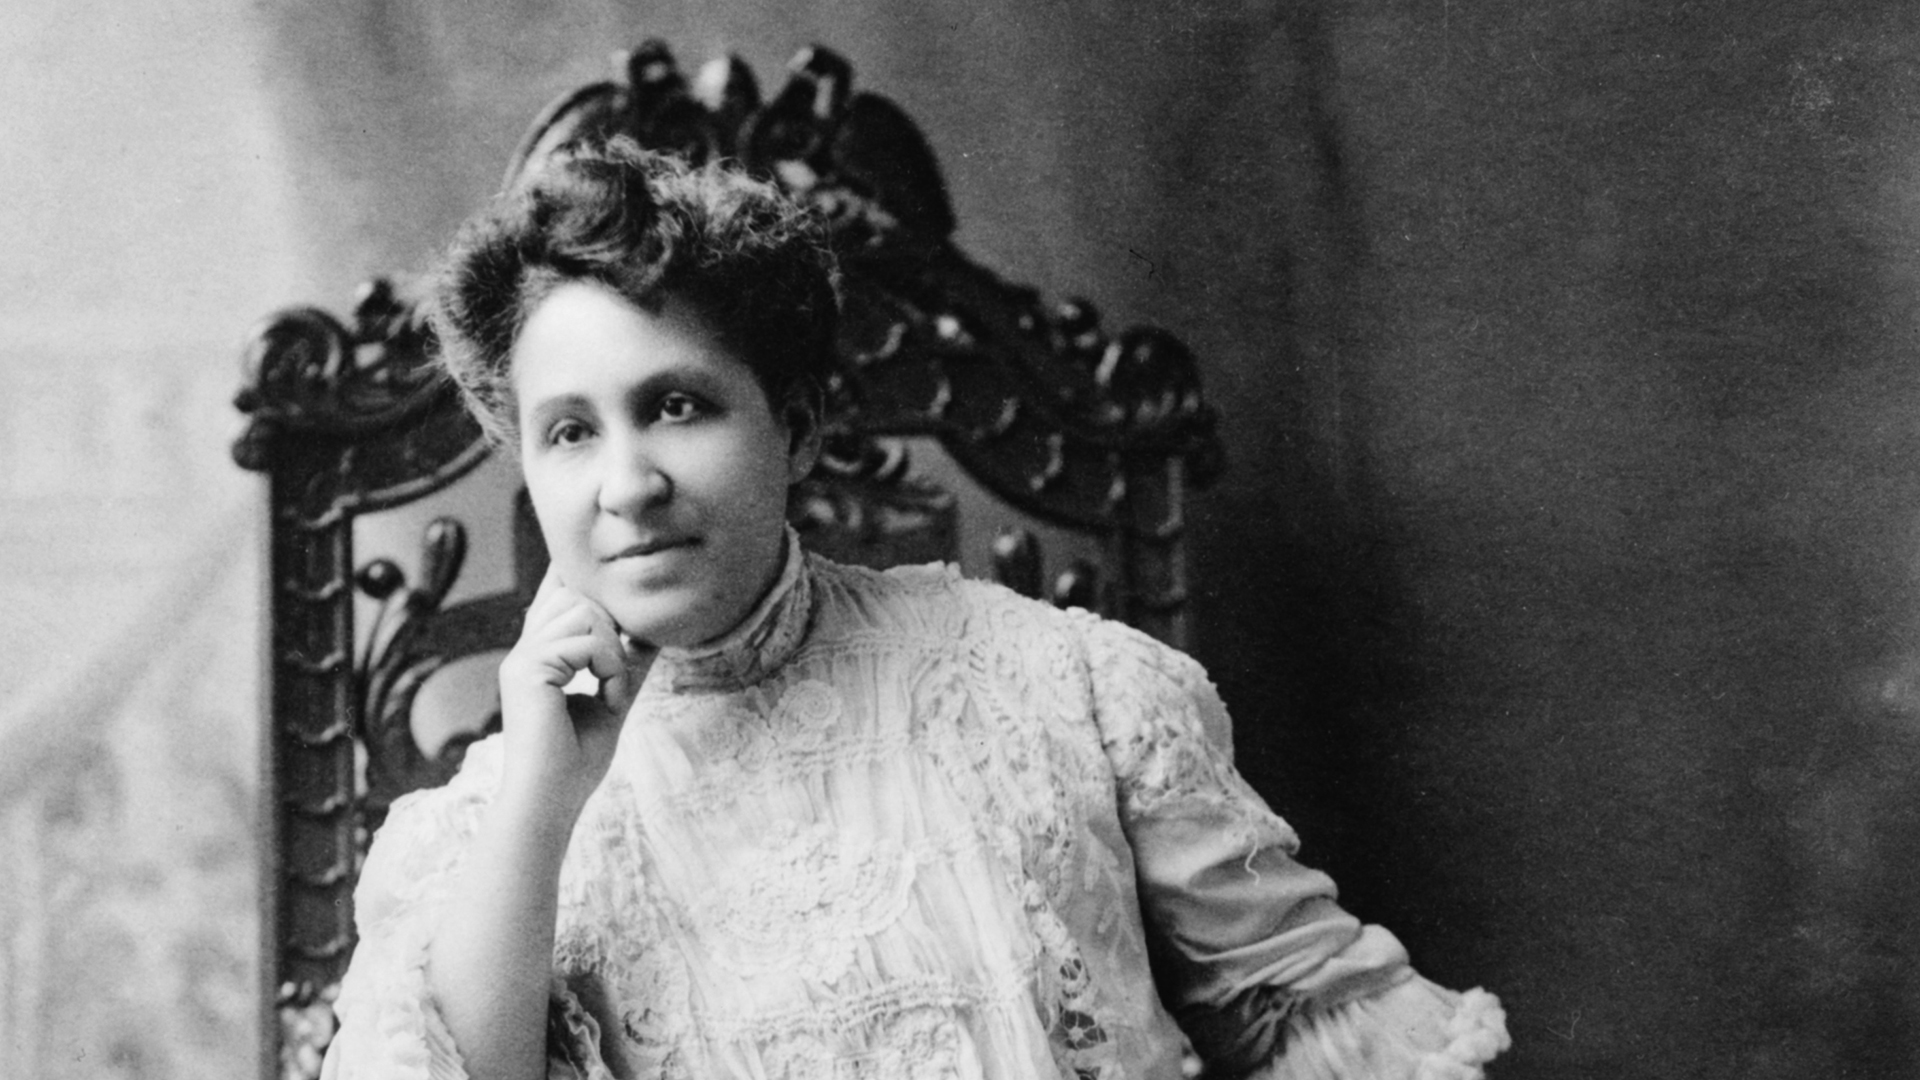 July 21, 1896: Mary Church Terrell Founded the National Association of Colored Women in Washington, D.C.